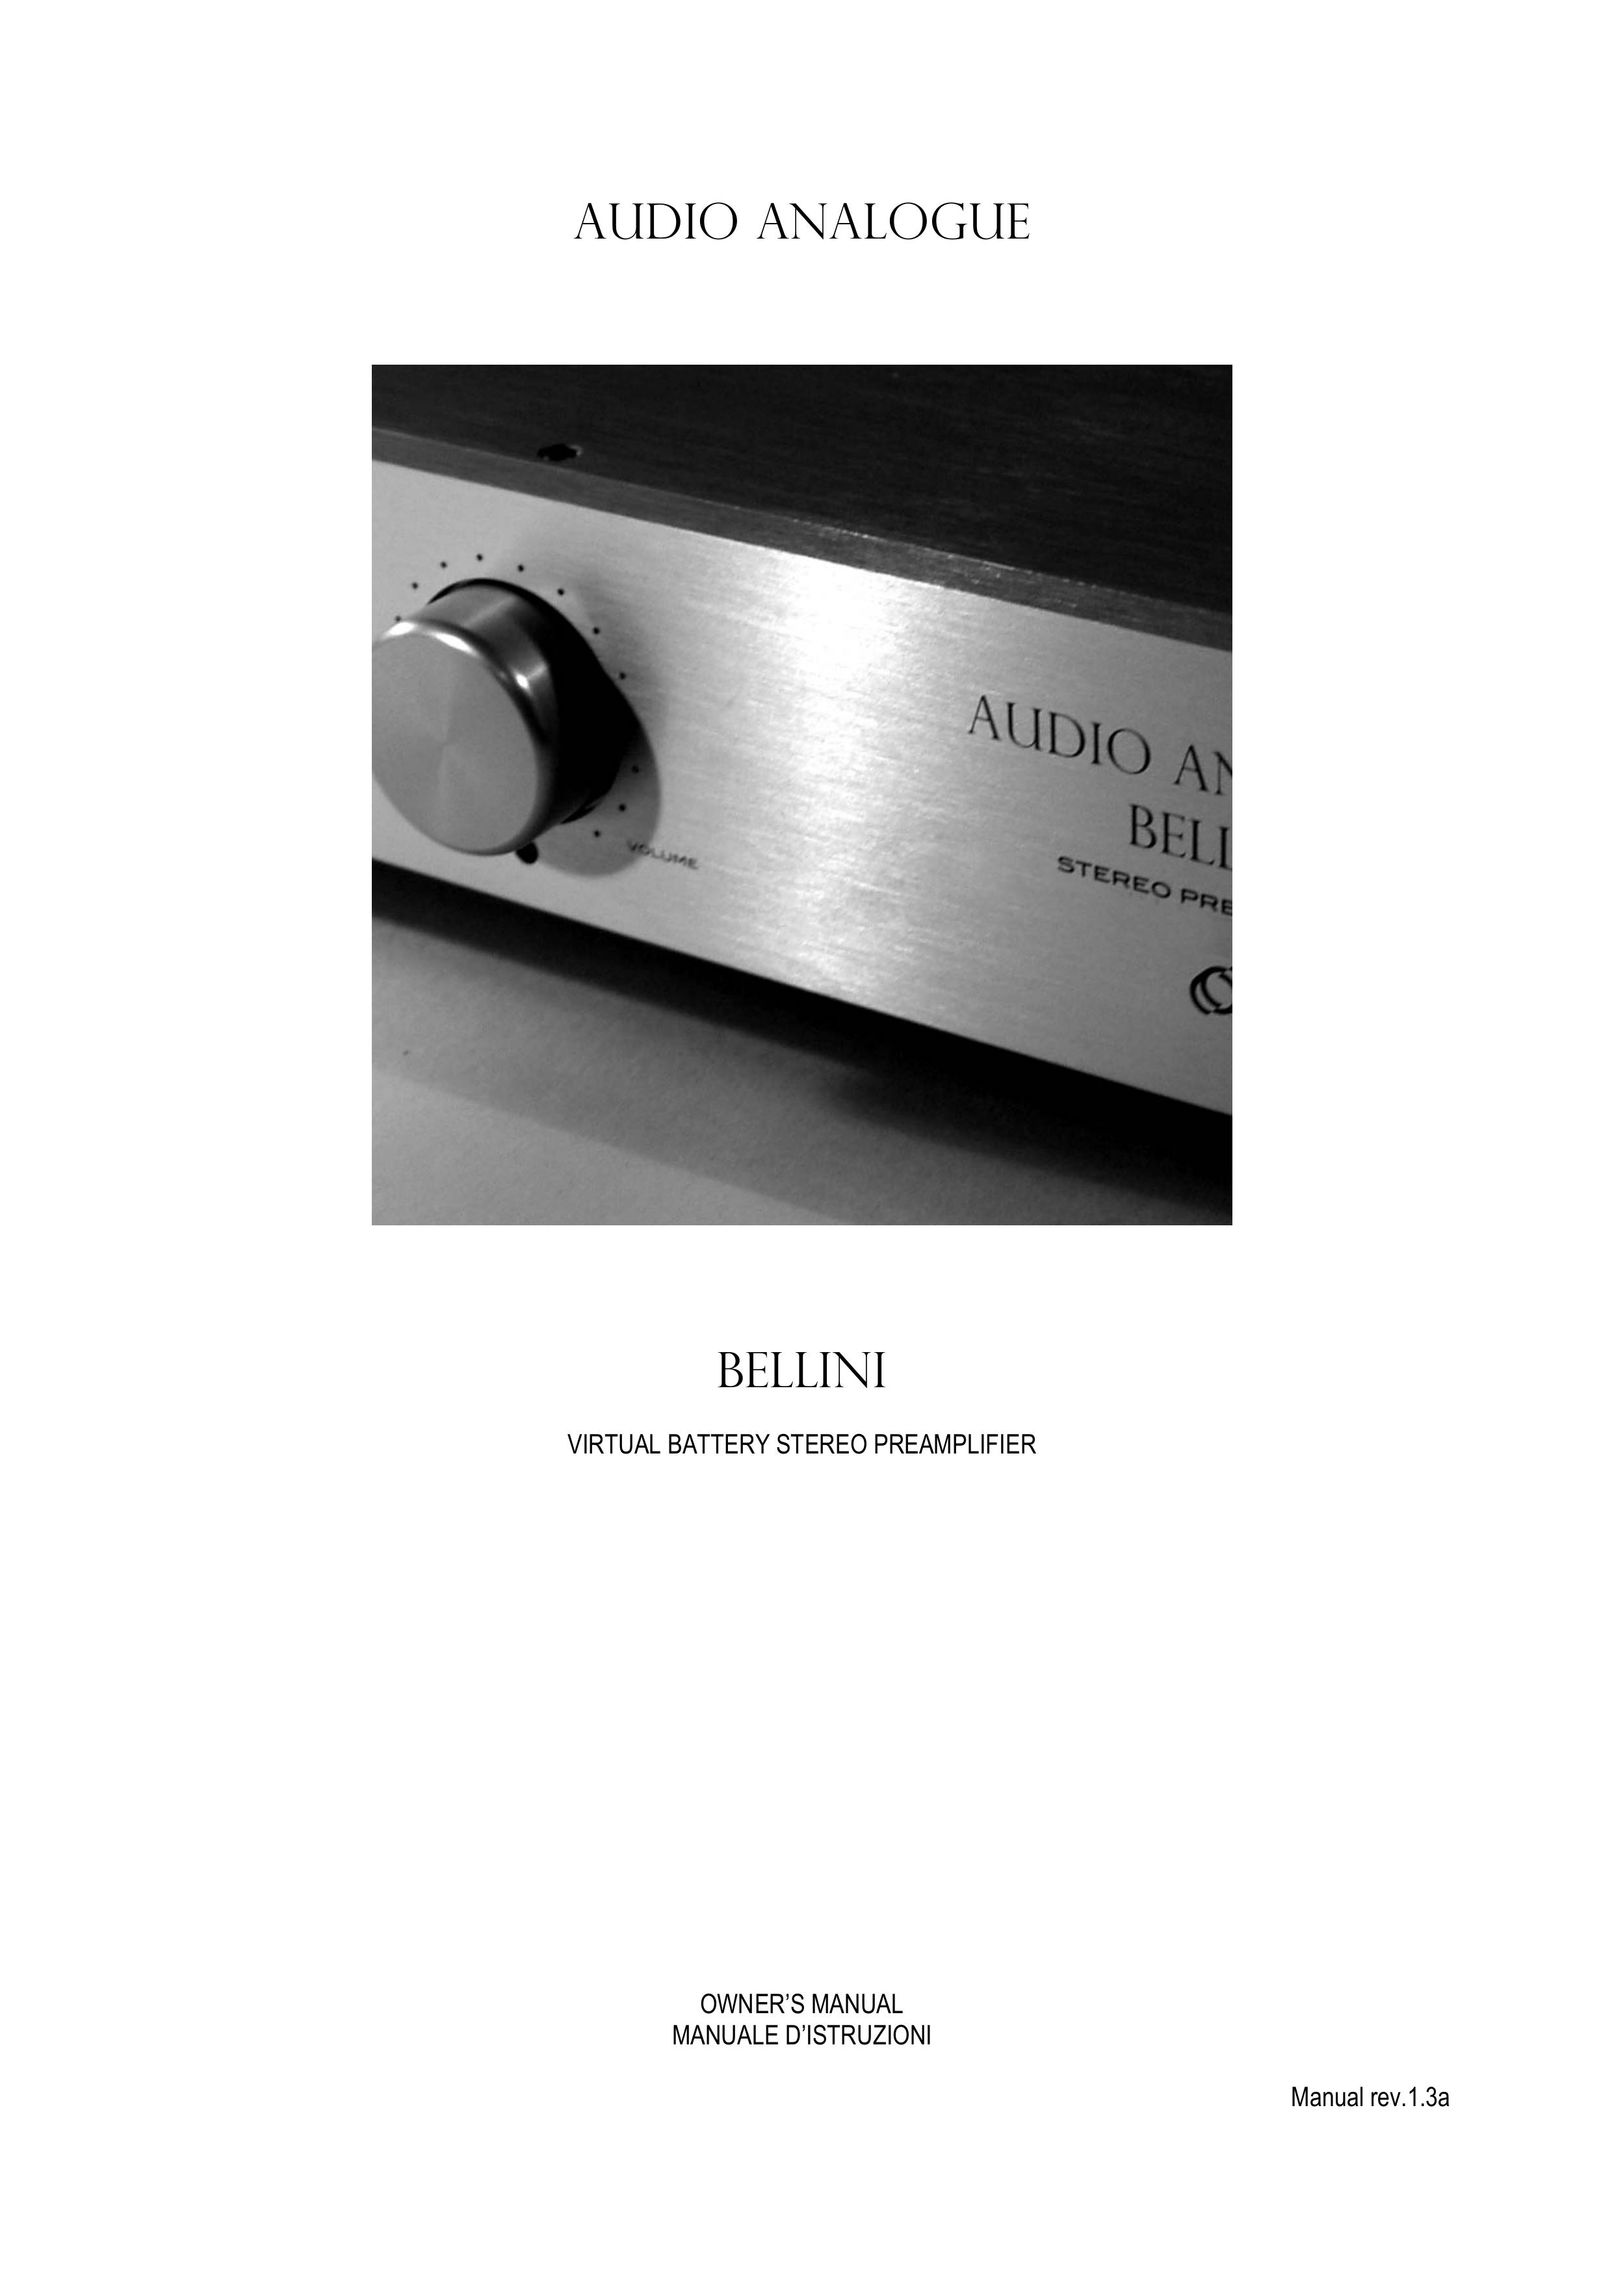 Audio Analogue SRL BELLINI Stereo Amplifier User Manual